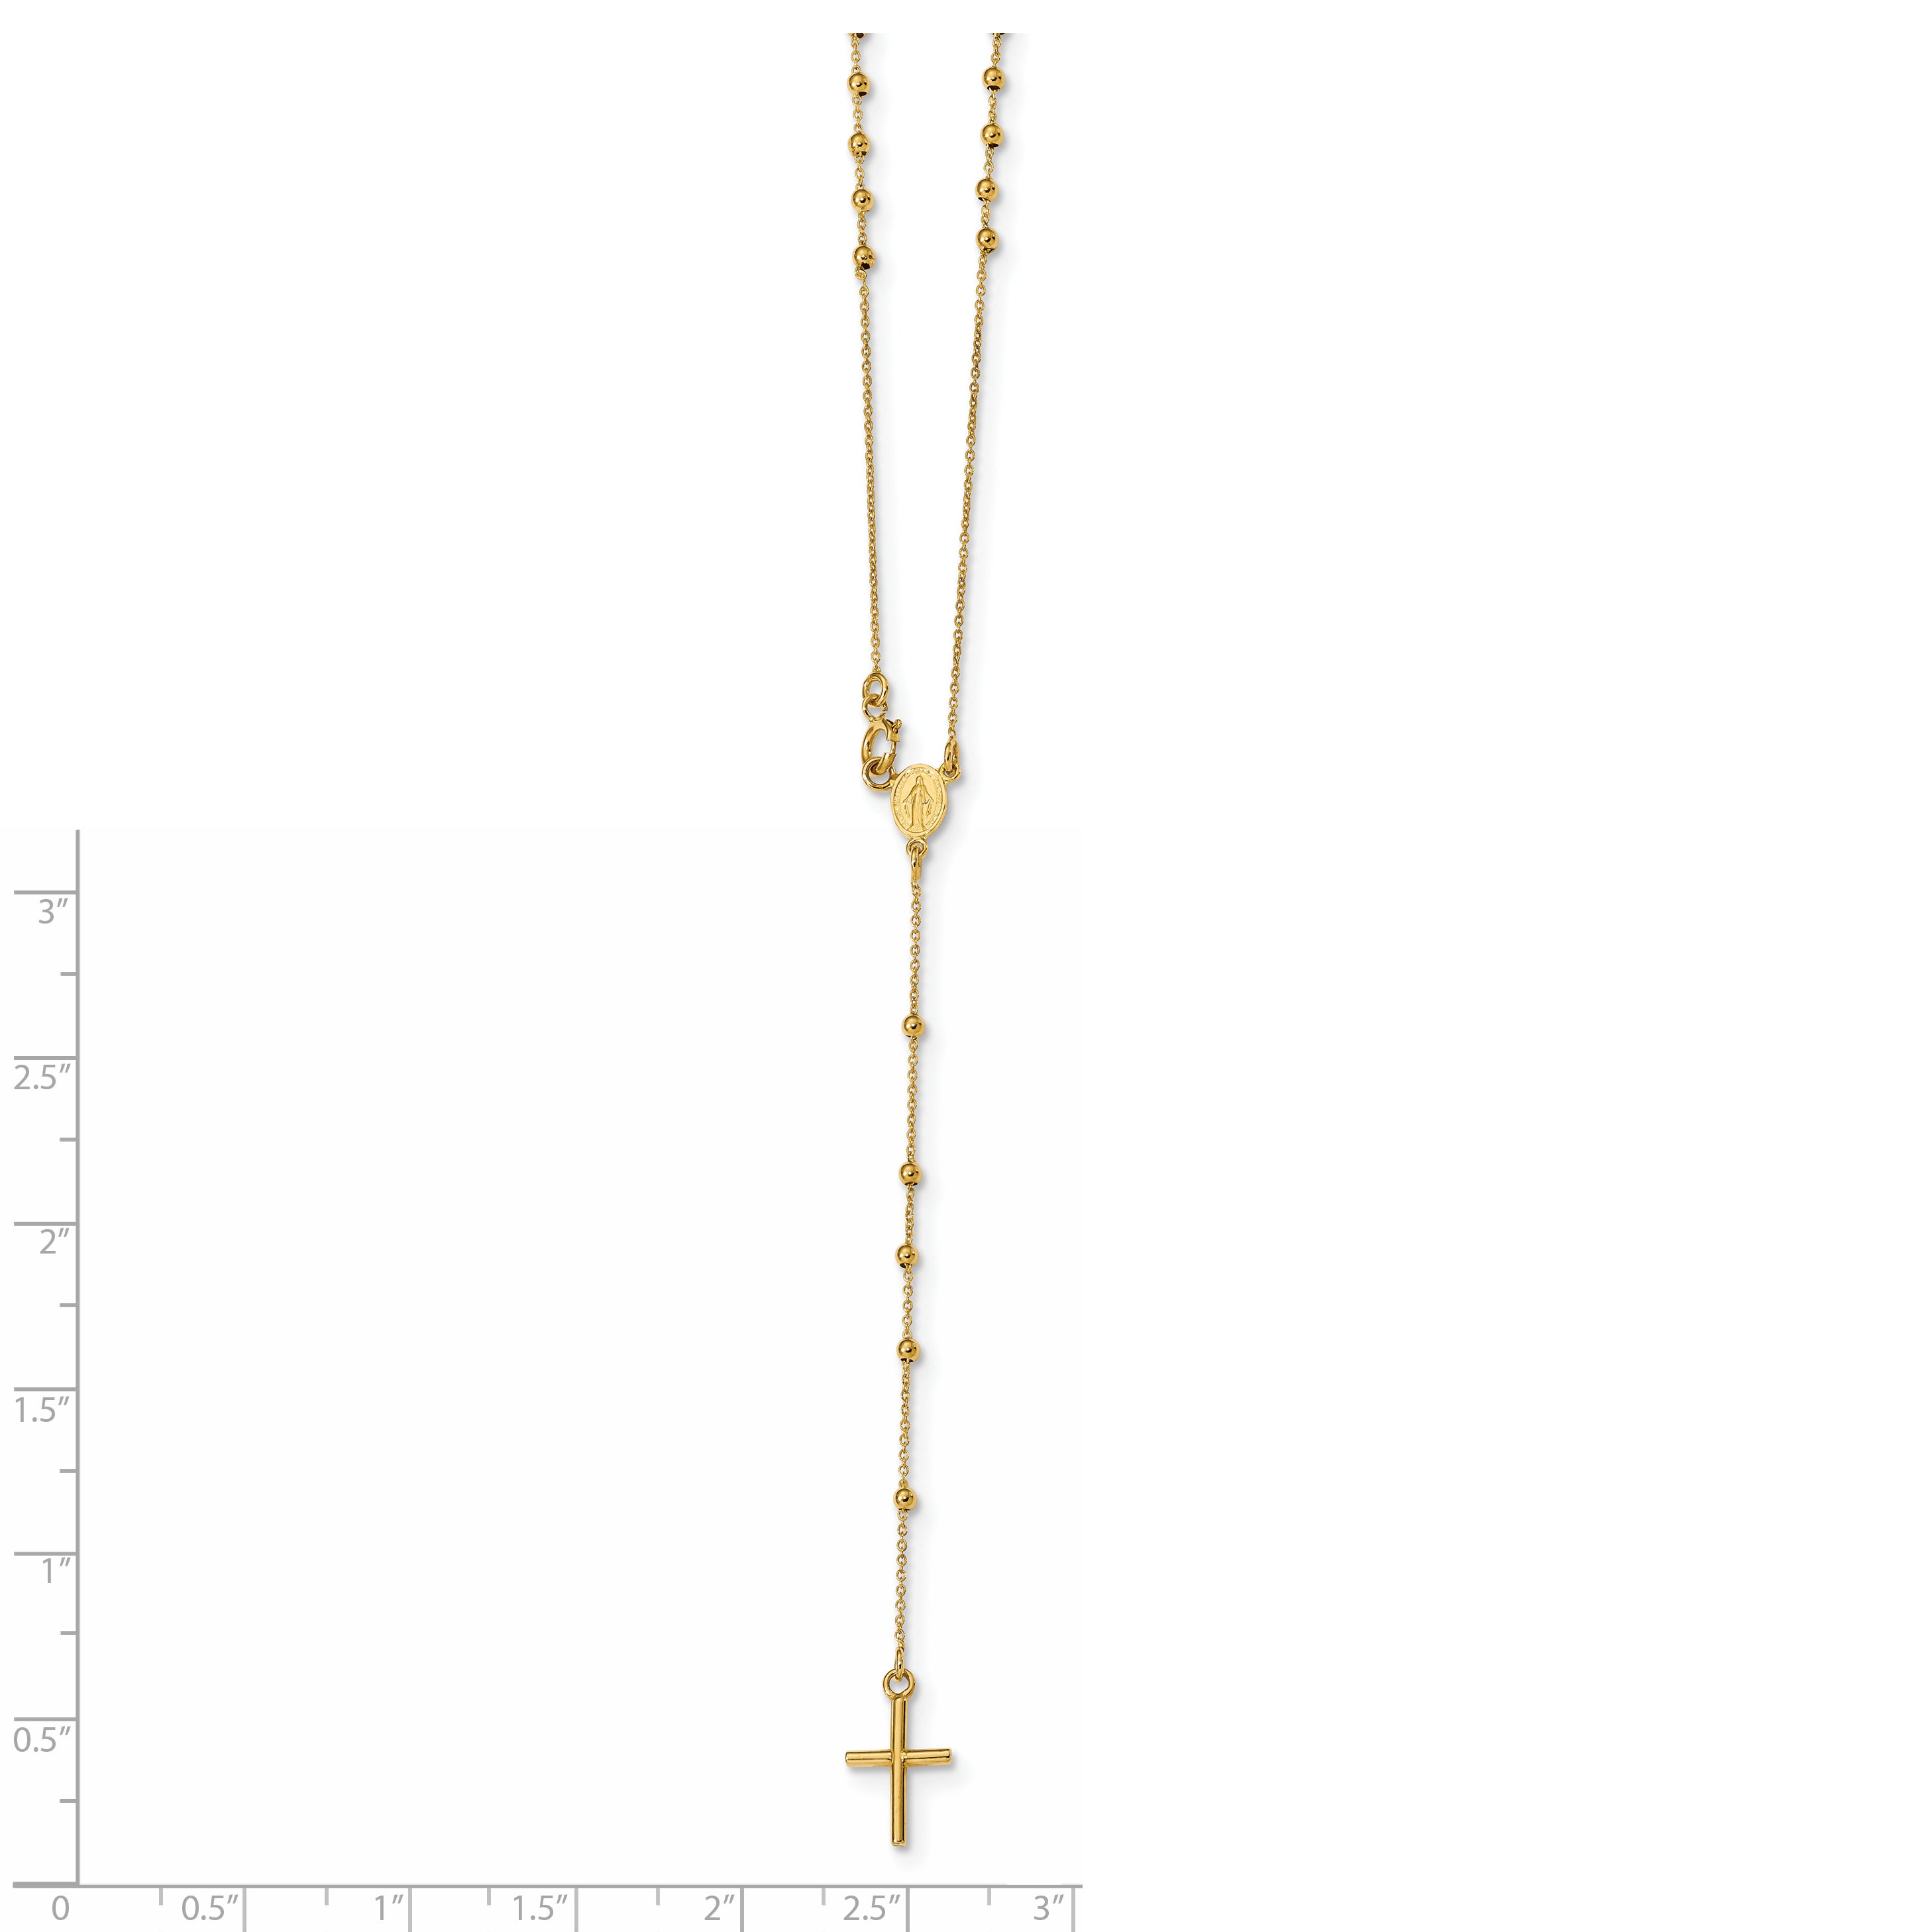 14k Polished Beaded Rosary 16.5 inch Necklace